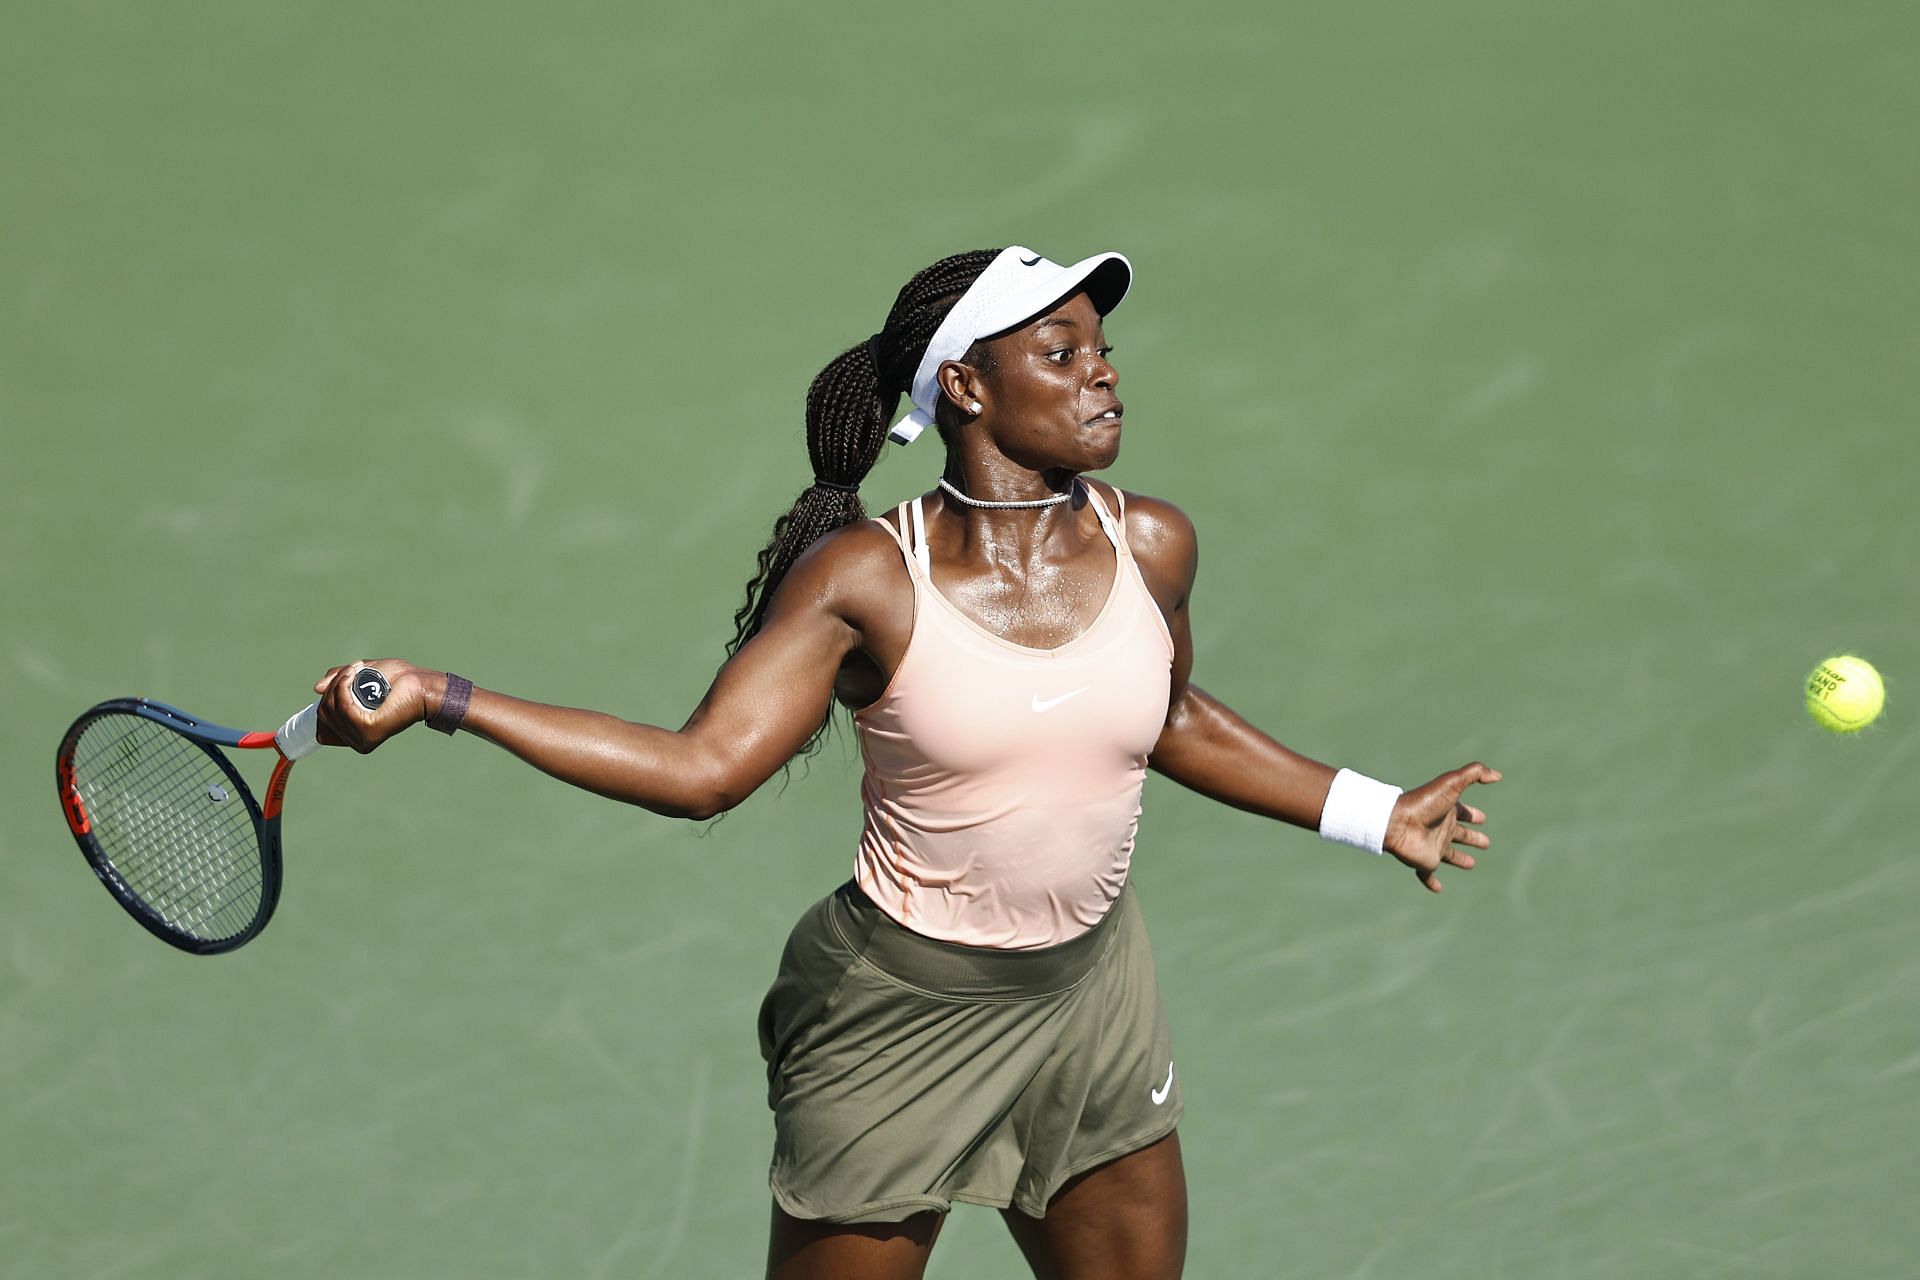 Sloane Stephens in action at the 2022 San Diego Open - Day 2.